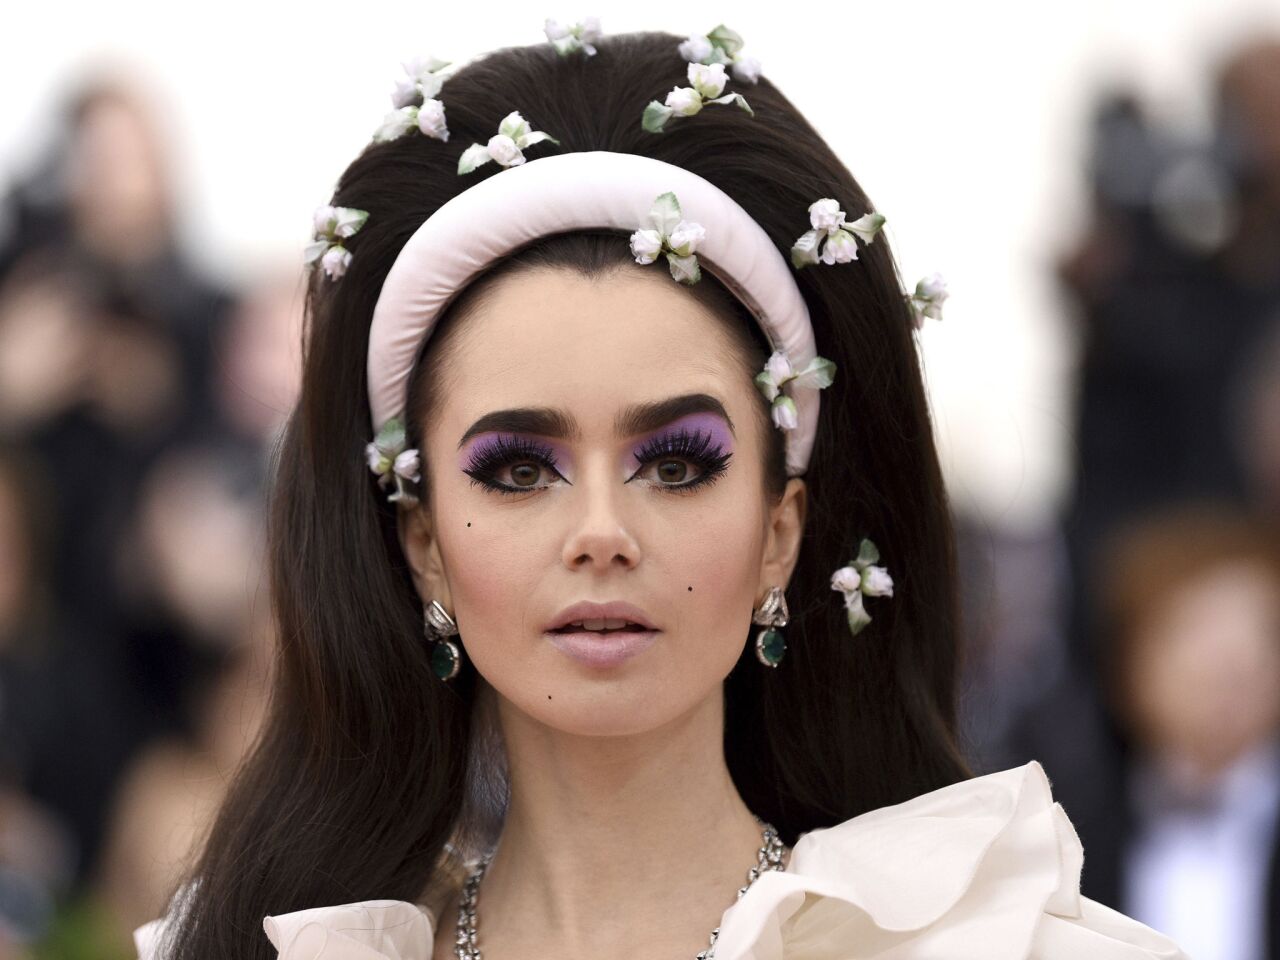 Lily Collins wears lavender eyeshadow and a bouffant at the 2019 Met Gala.